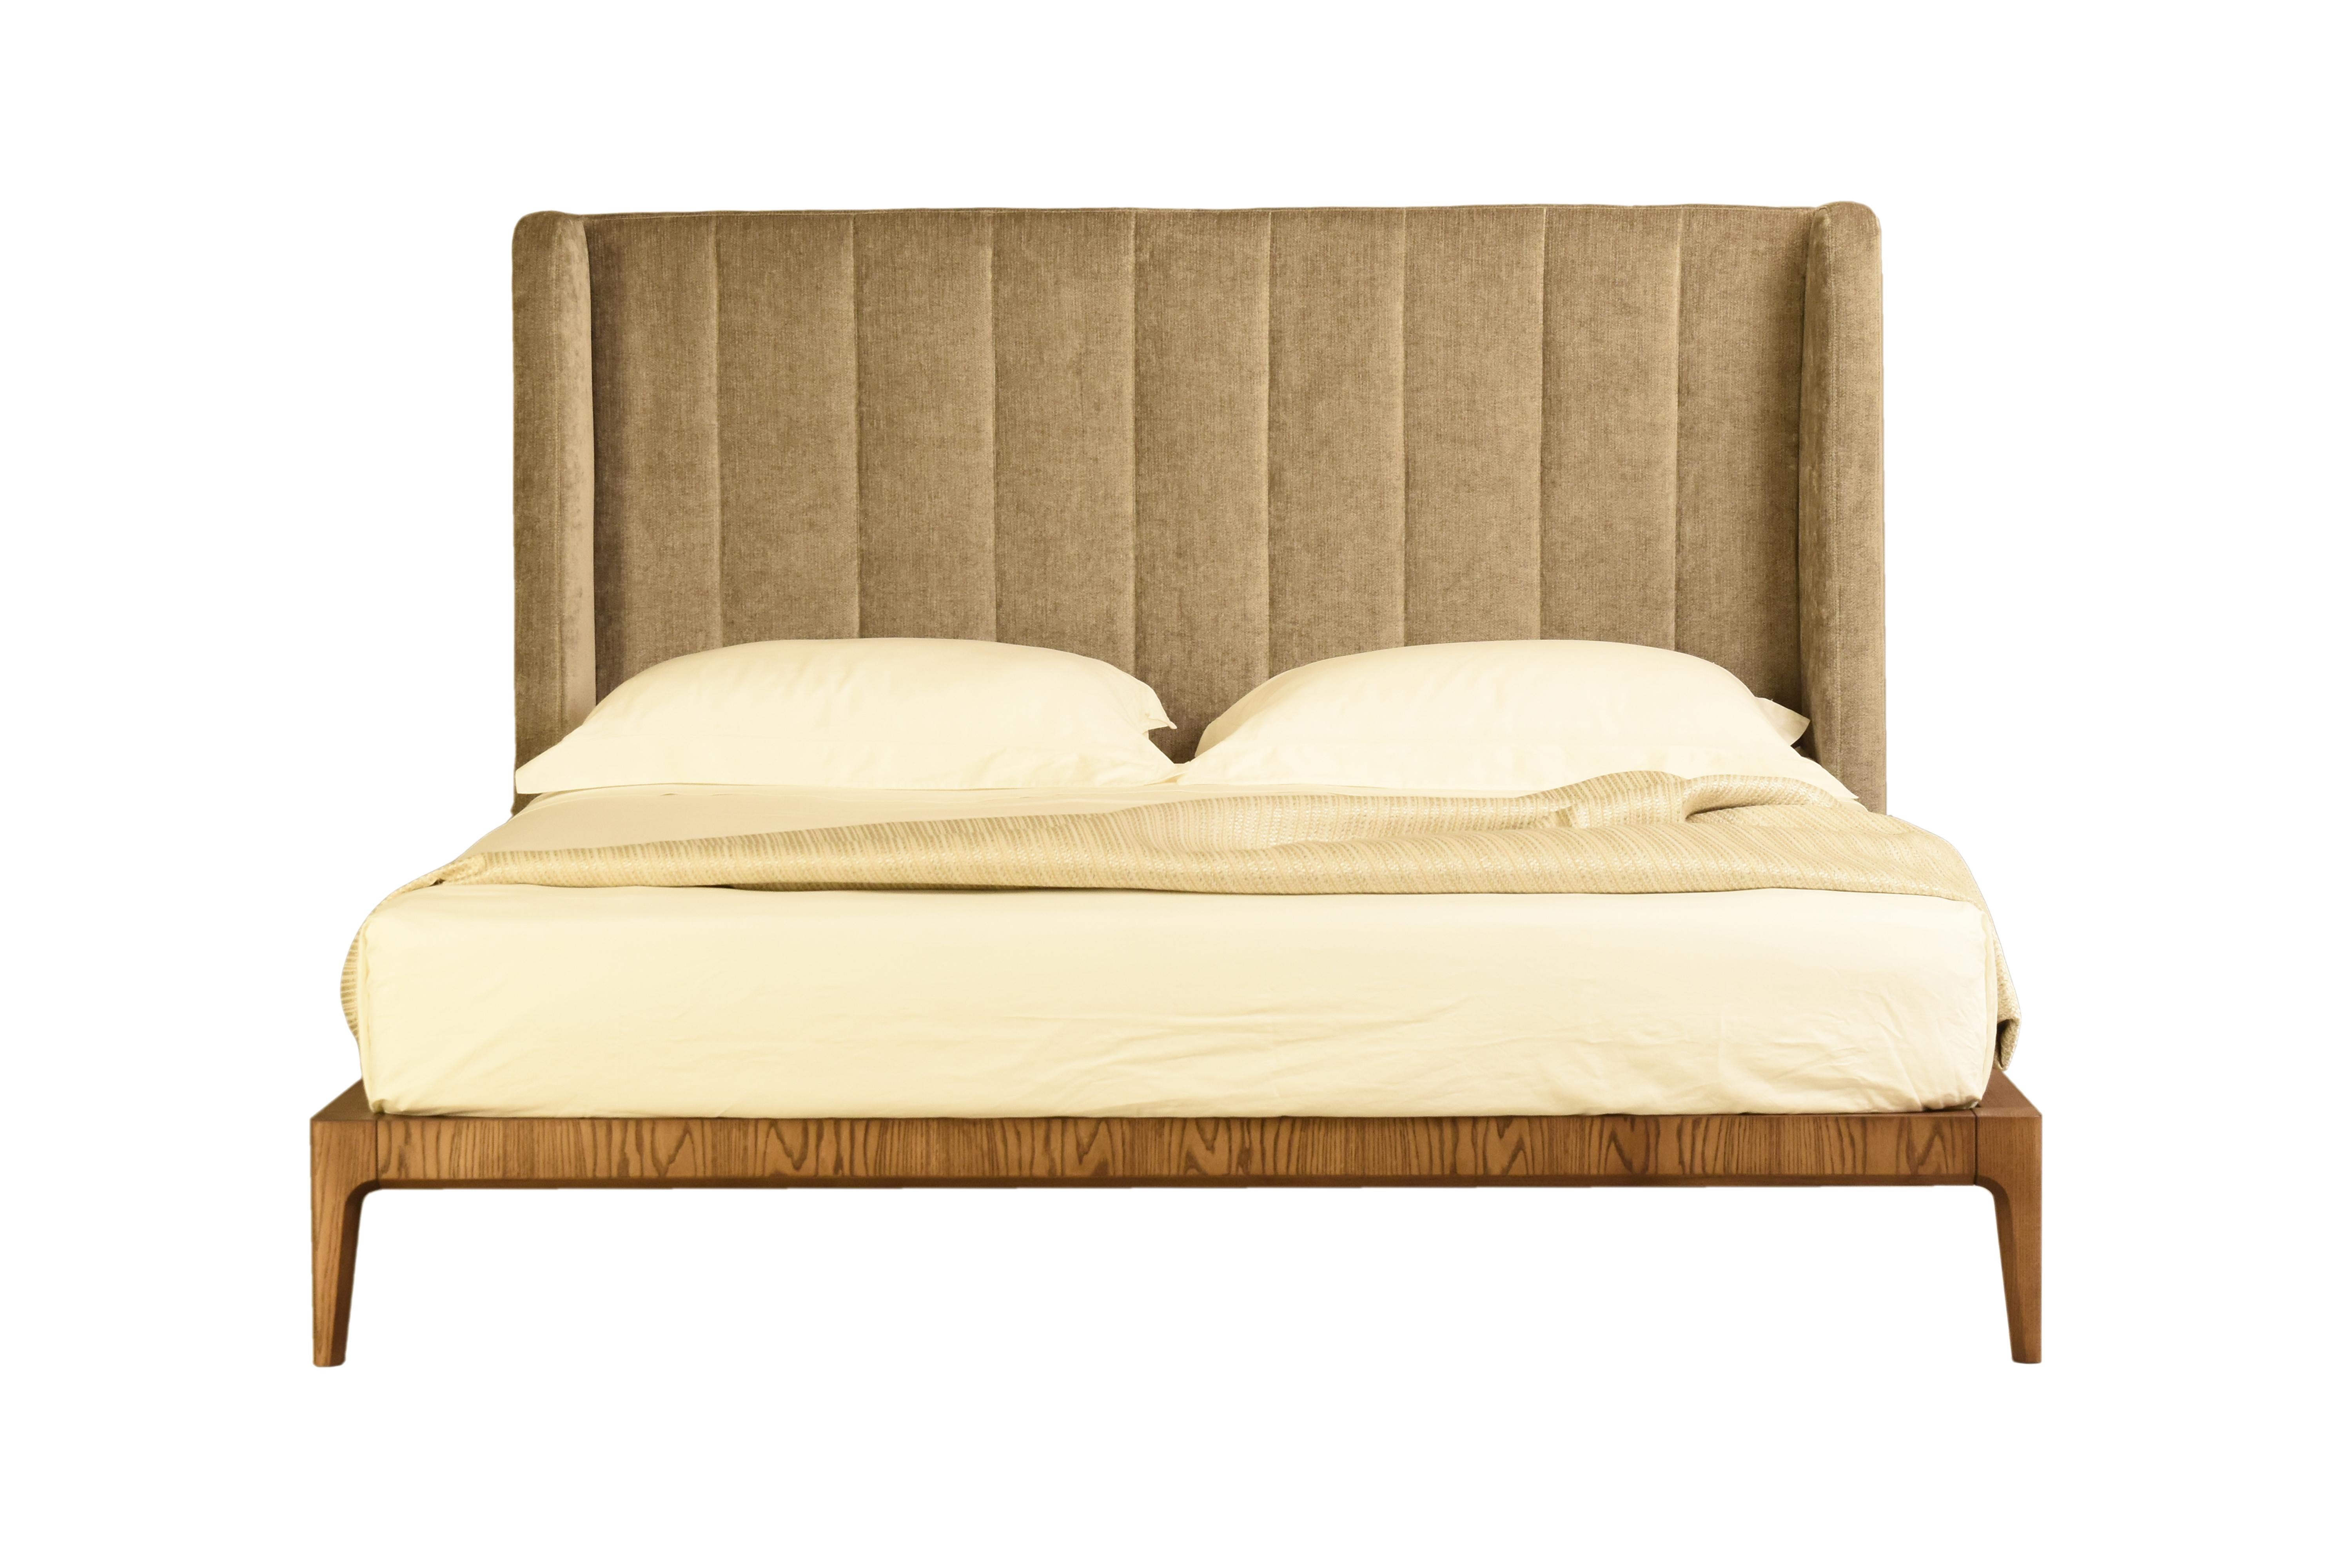 Bellagio contemporary bed made of ashwood with leather or fabric upholstered headboard.
Available in different mattress sizes:
Cal king, king, queen, etc..
Wooden slats mattress support included.
Made in Italy by Morelato